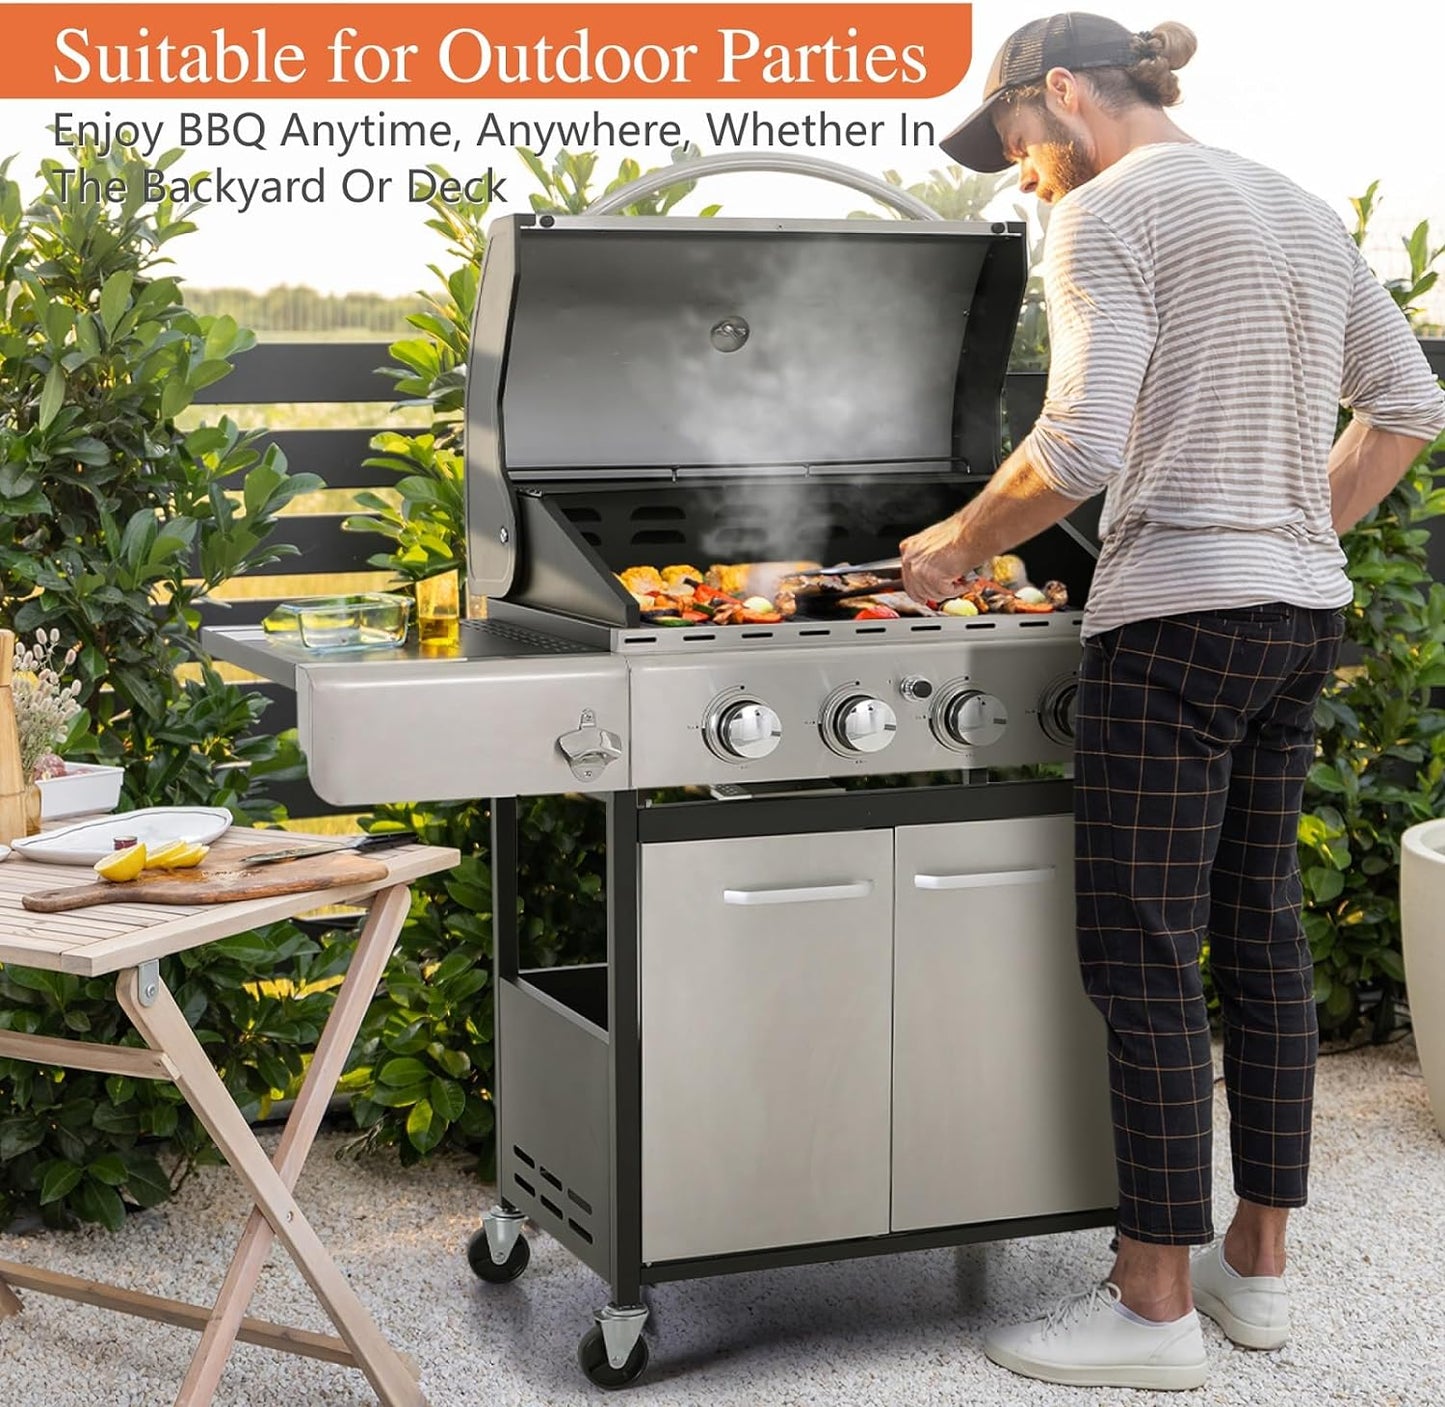 4-Burner Gas BBQ Grill with Side Burner and Porcelain-Enameled Cast Iron Grates 42,000BTU Outdoor Cooking Stainless Steel Propane Grills Cabinet Style Garden Barbecue Grill, Silver